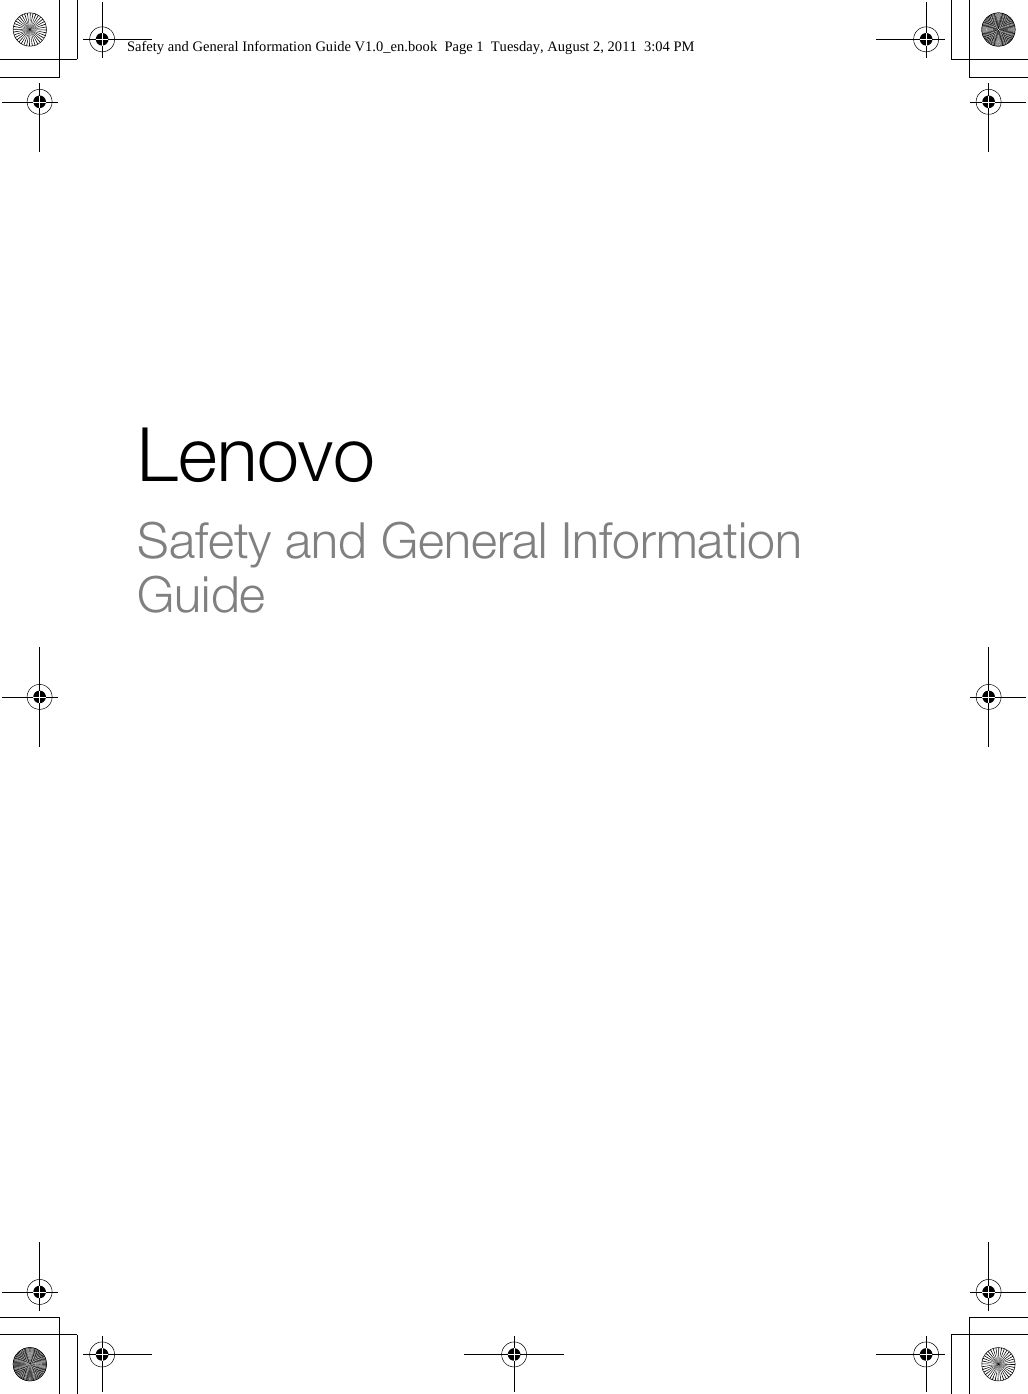 LenovoSafety and General Information GuideSafety and General Information Guide V1.0_en.book  Page 1  Tuesday, August 2, 2011  3:04 PM